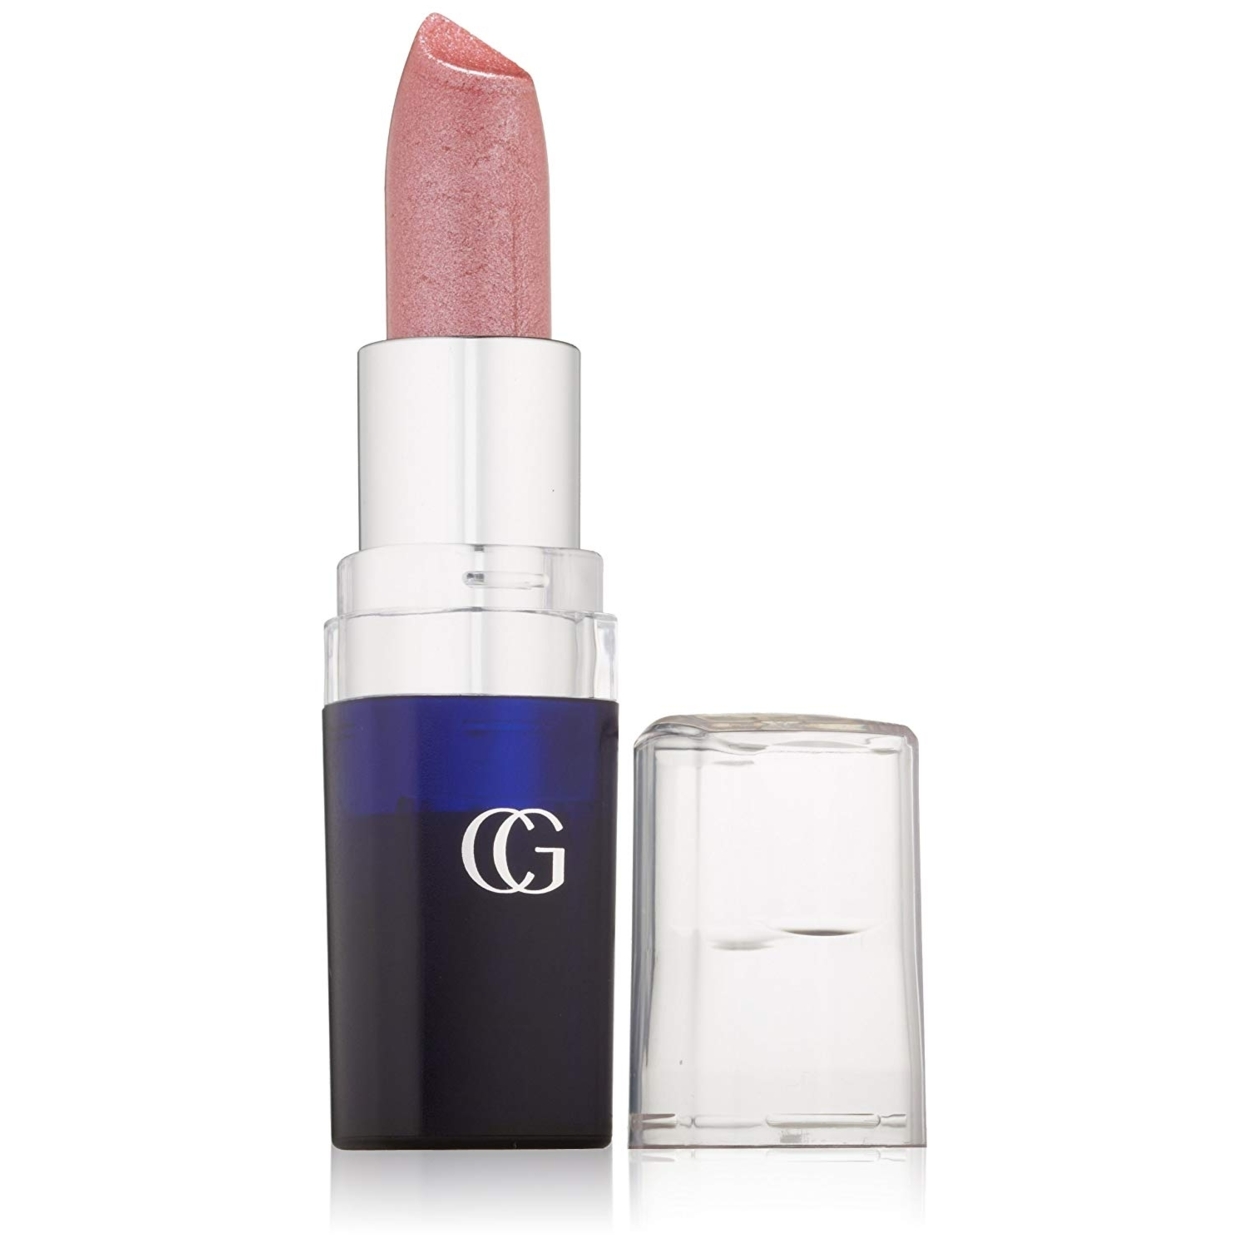 CoverGirl Continuous Color Lipstick, Iced Mauve 420, 0.13-Ounce Bottles